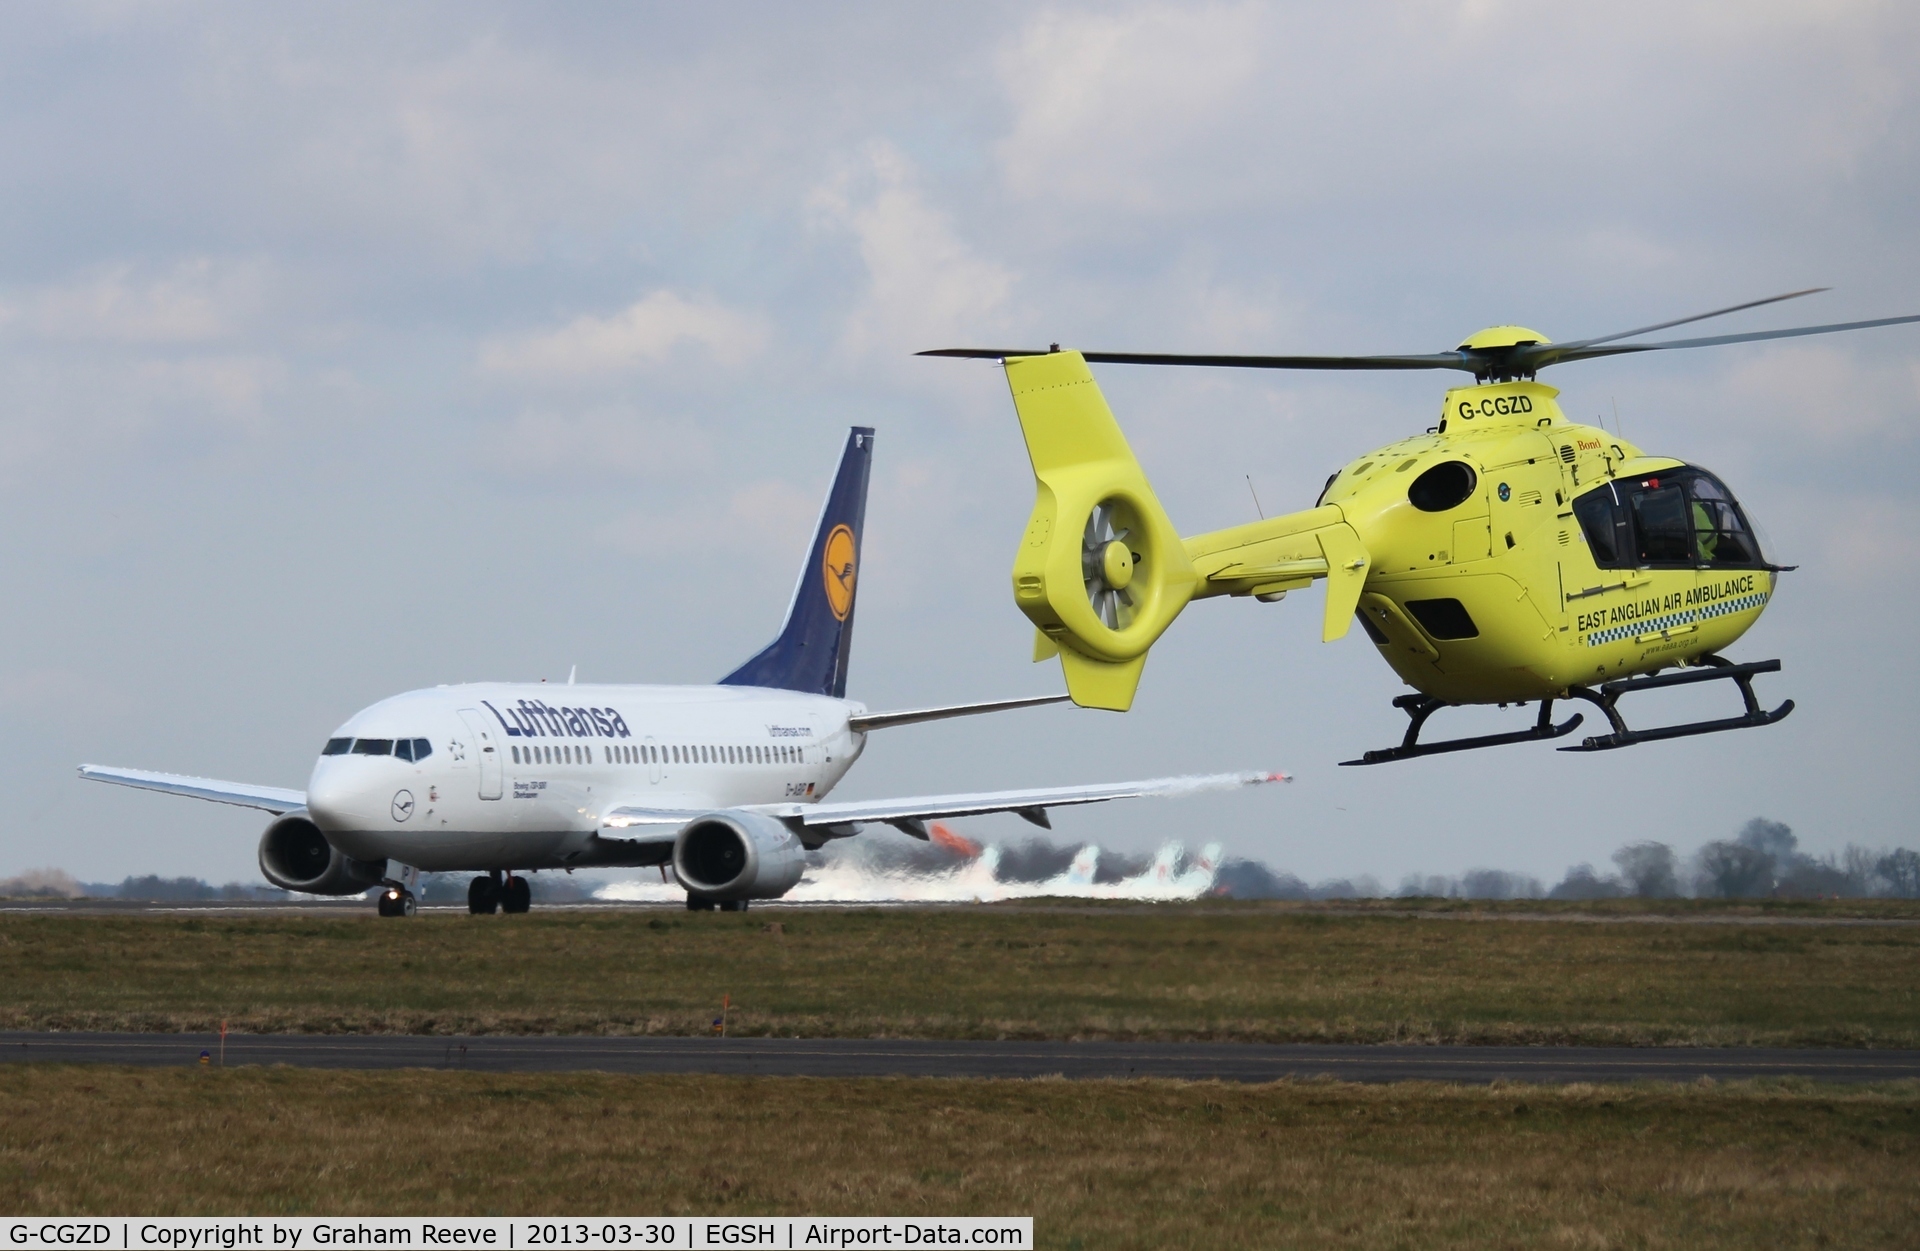 G-CGZD, 2006 Eurocopter EC-135P-2 C/N 0460, With D-ABIP in the back ground.